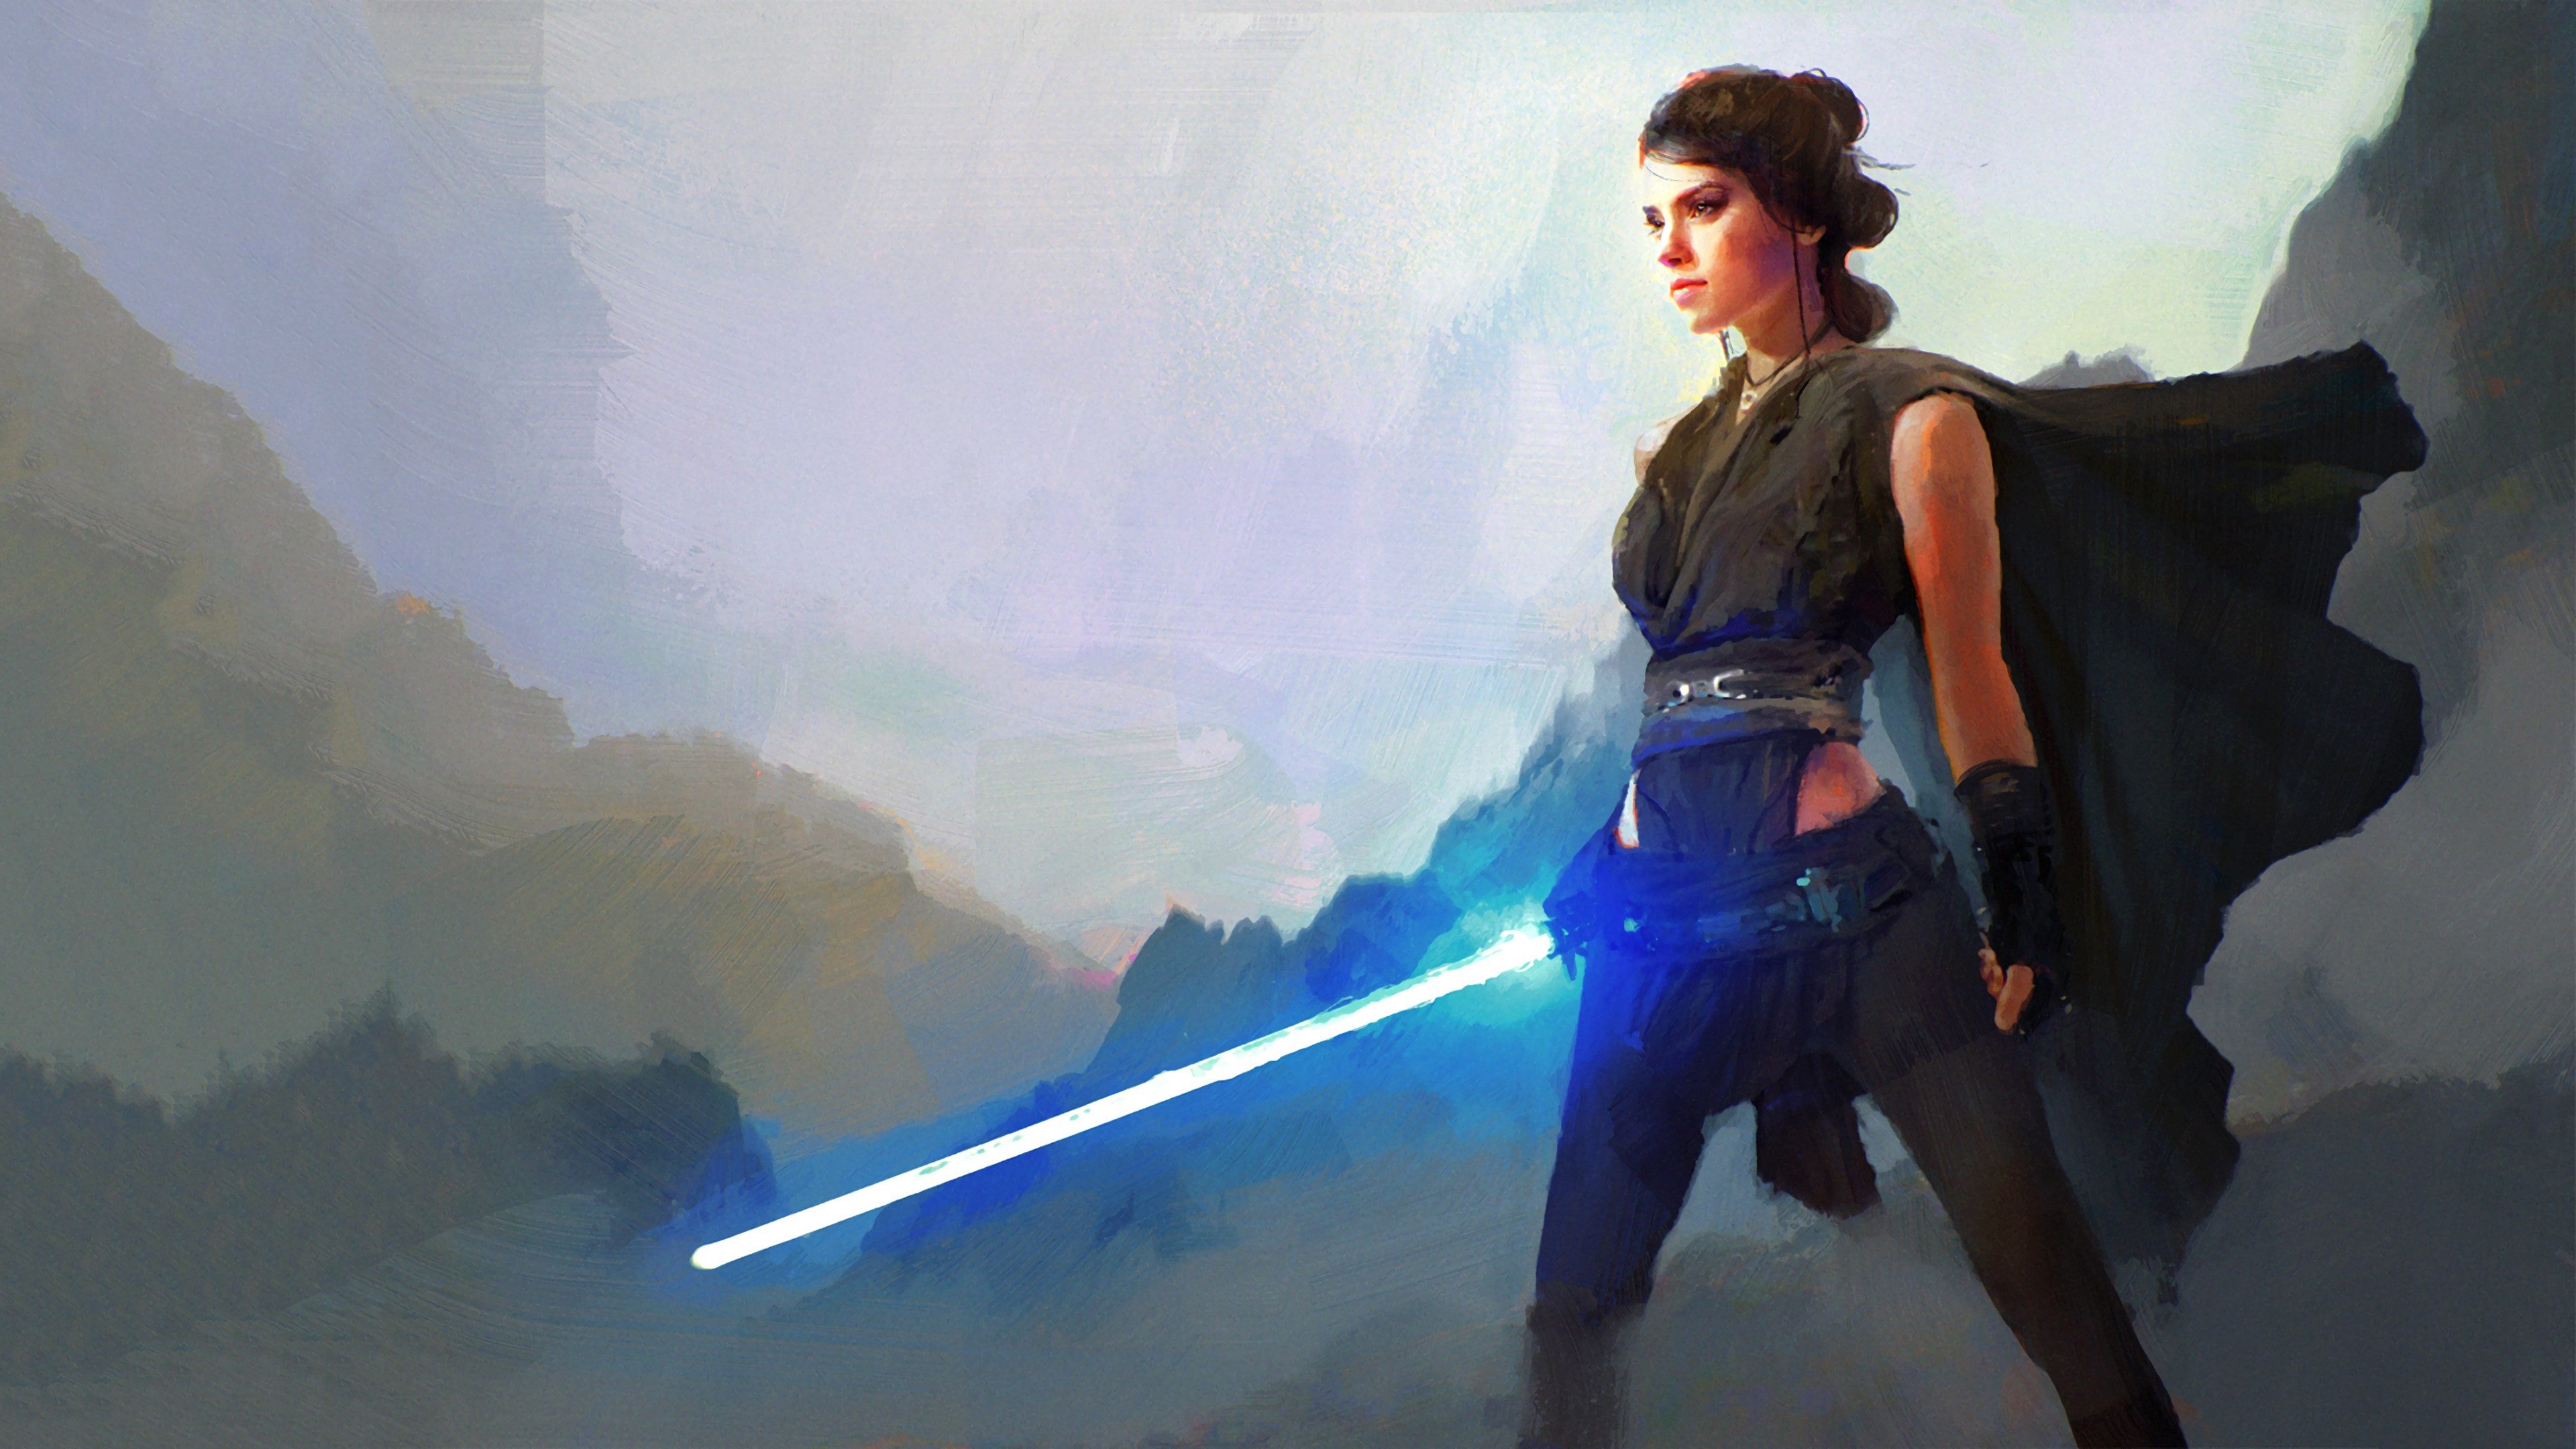 rey wallpaper,adventure game,action adventure game,fictional character,cg artwork,pc game